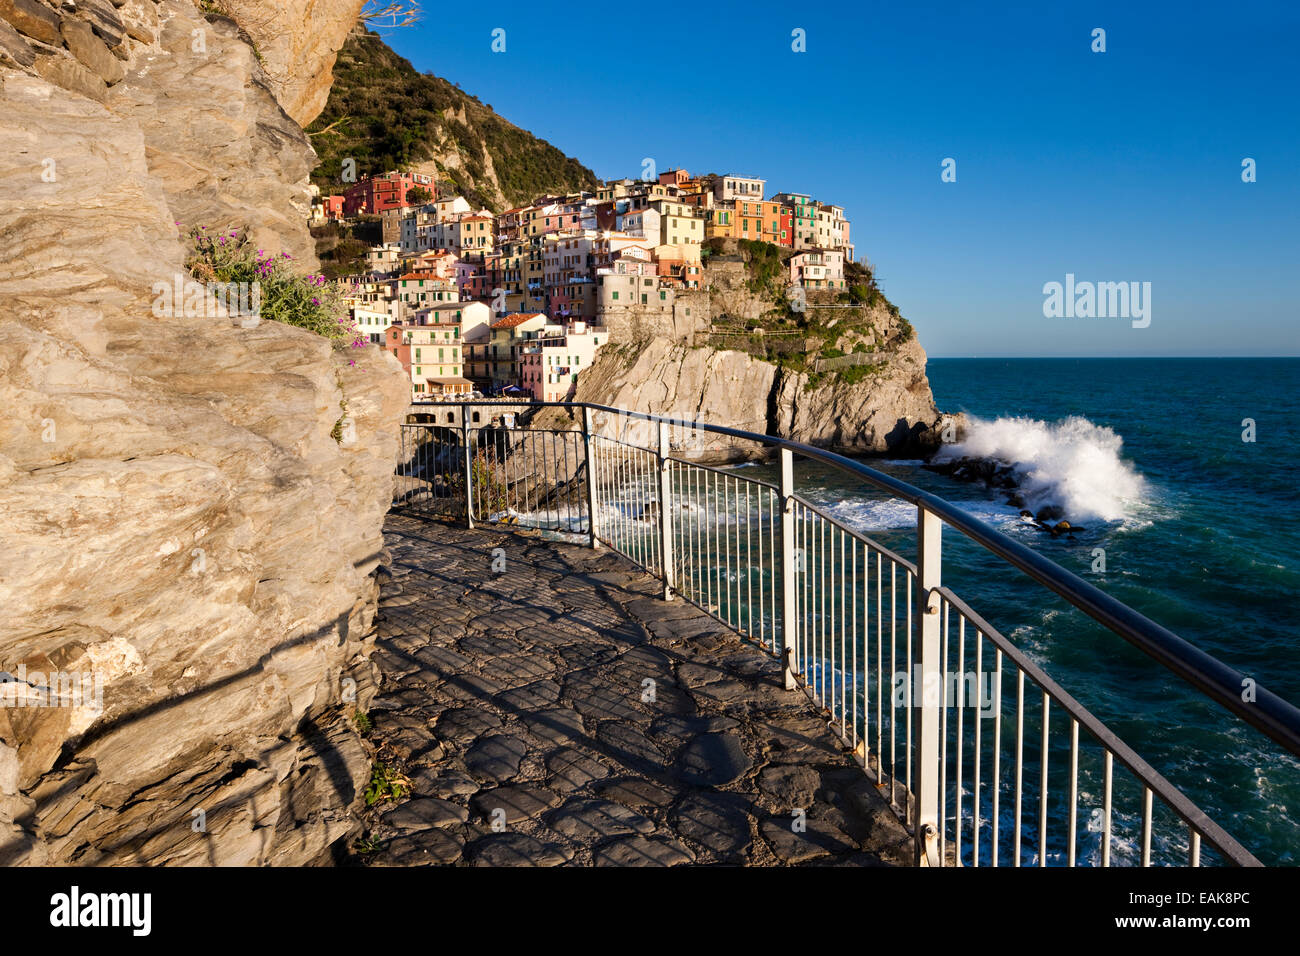 Hiking trail of Via dell' Amore in front of the houses of Manarola, UNESCO World Cultural Heritage Site, Manarola, Cinque Terre Stock Photo